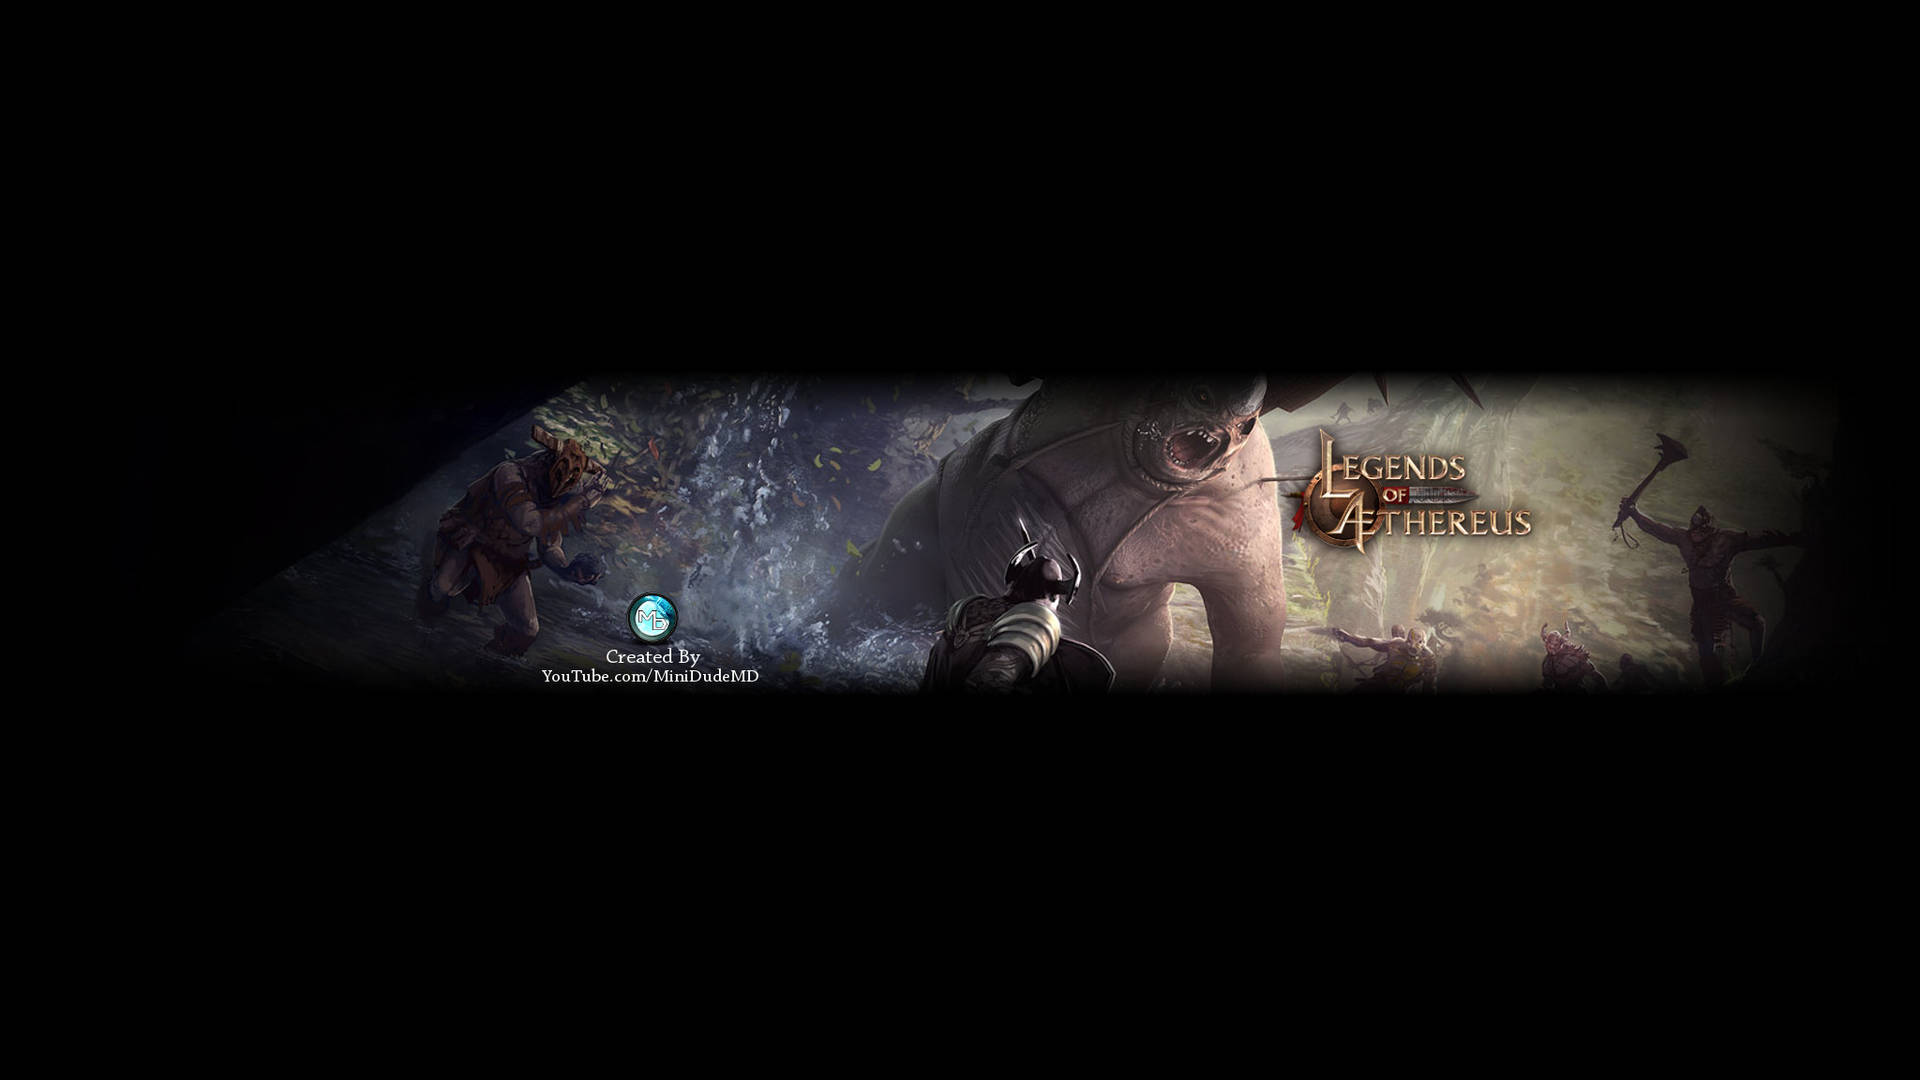 Legends Of Aethereus Youtube Banner Background